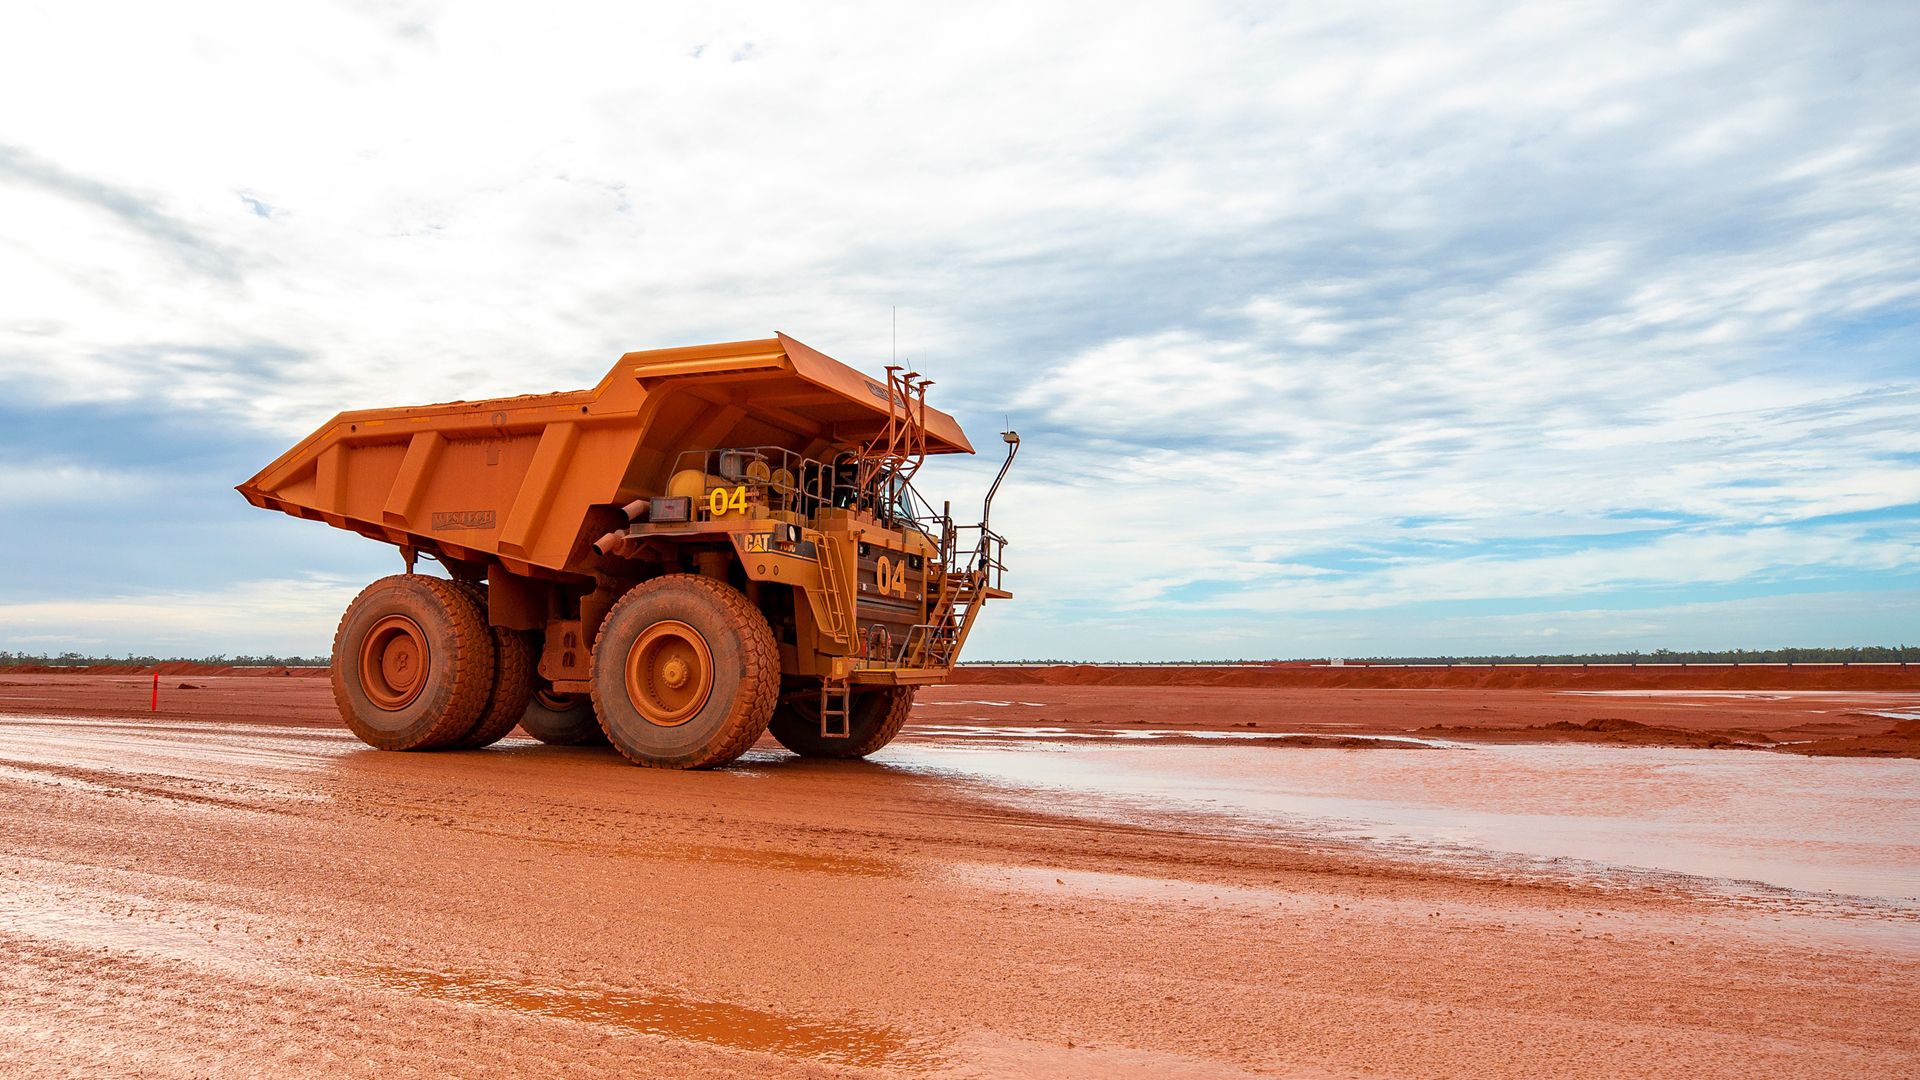 Spectacular side view photo of large mining truck. Red ground stretches all the way to the horizon.